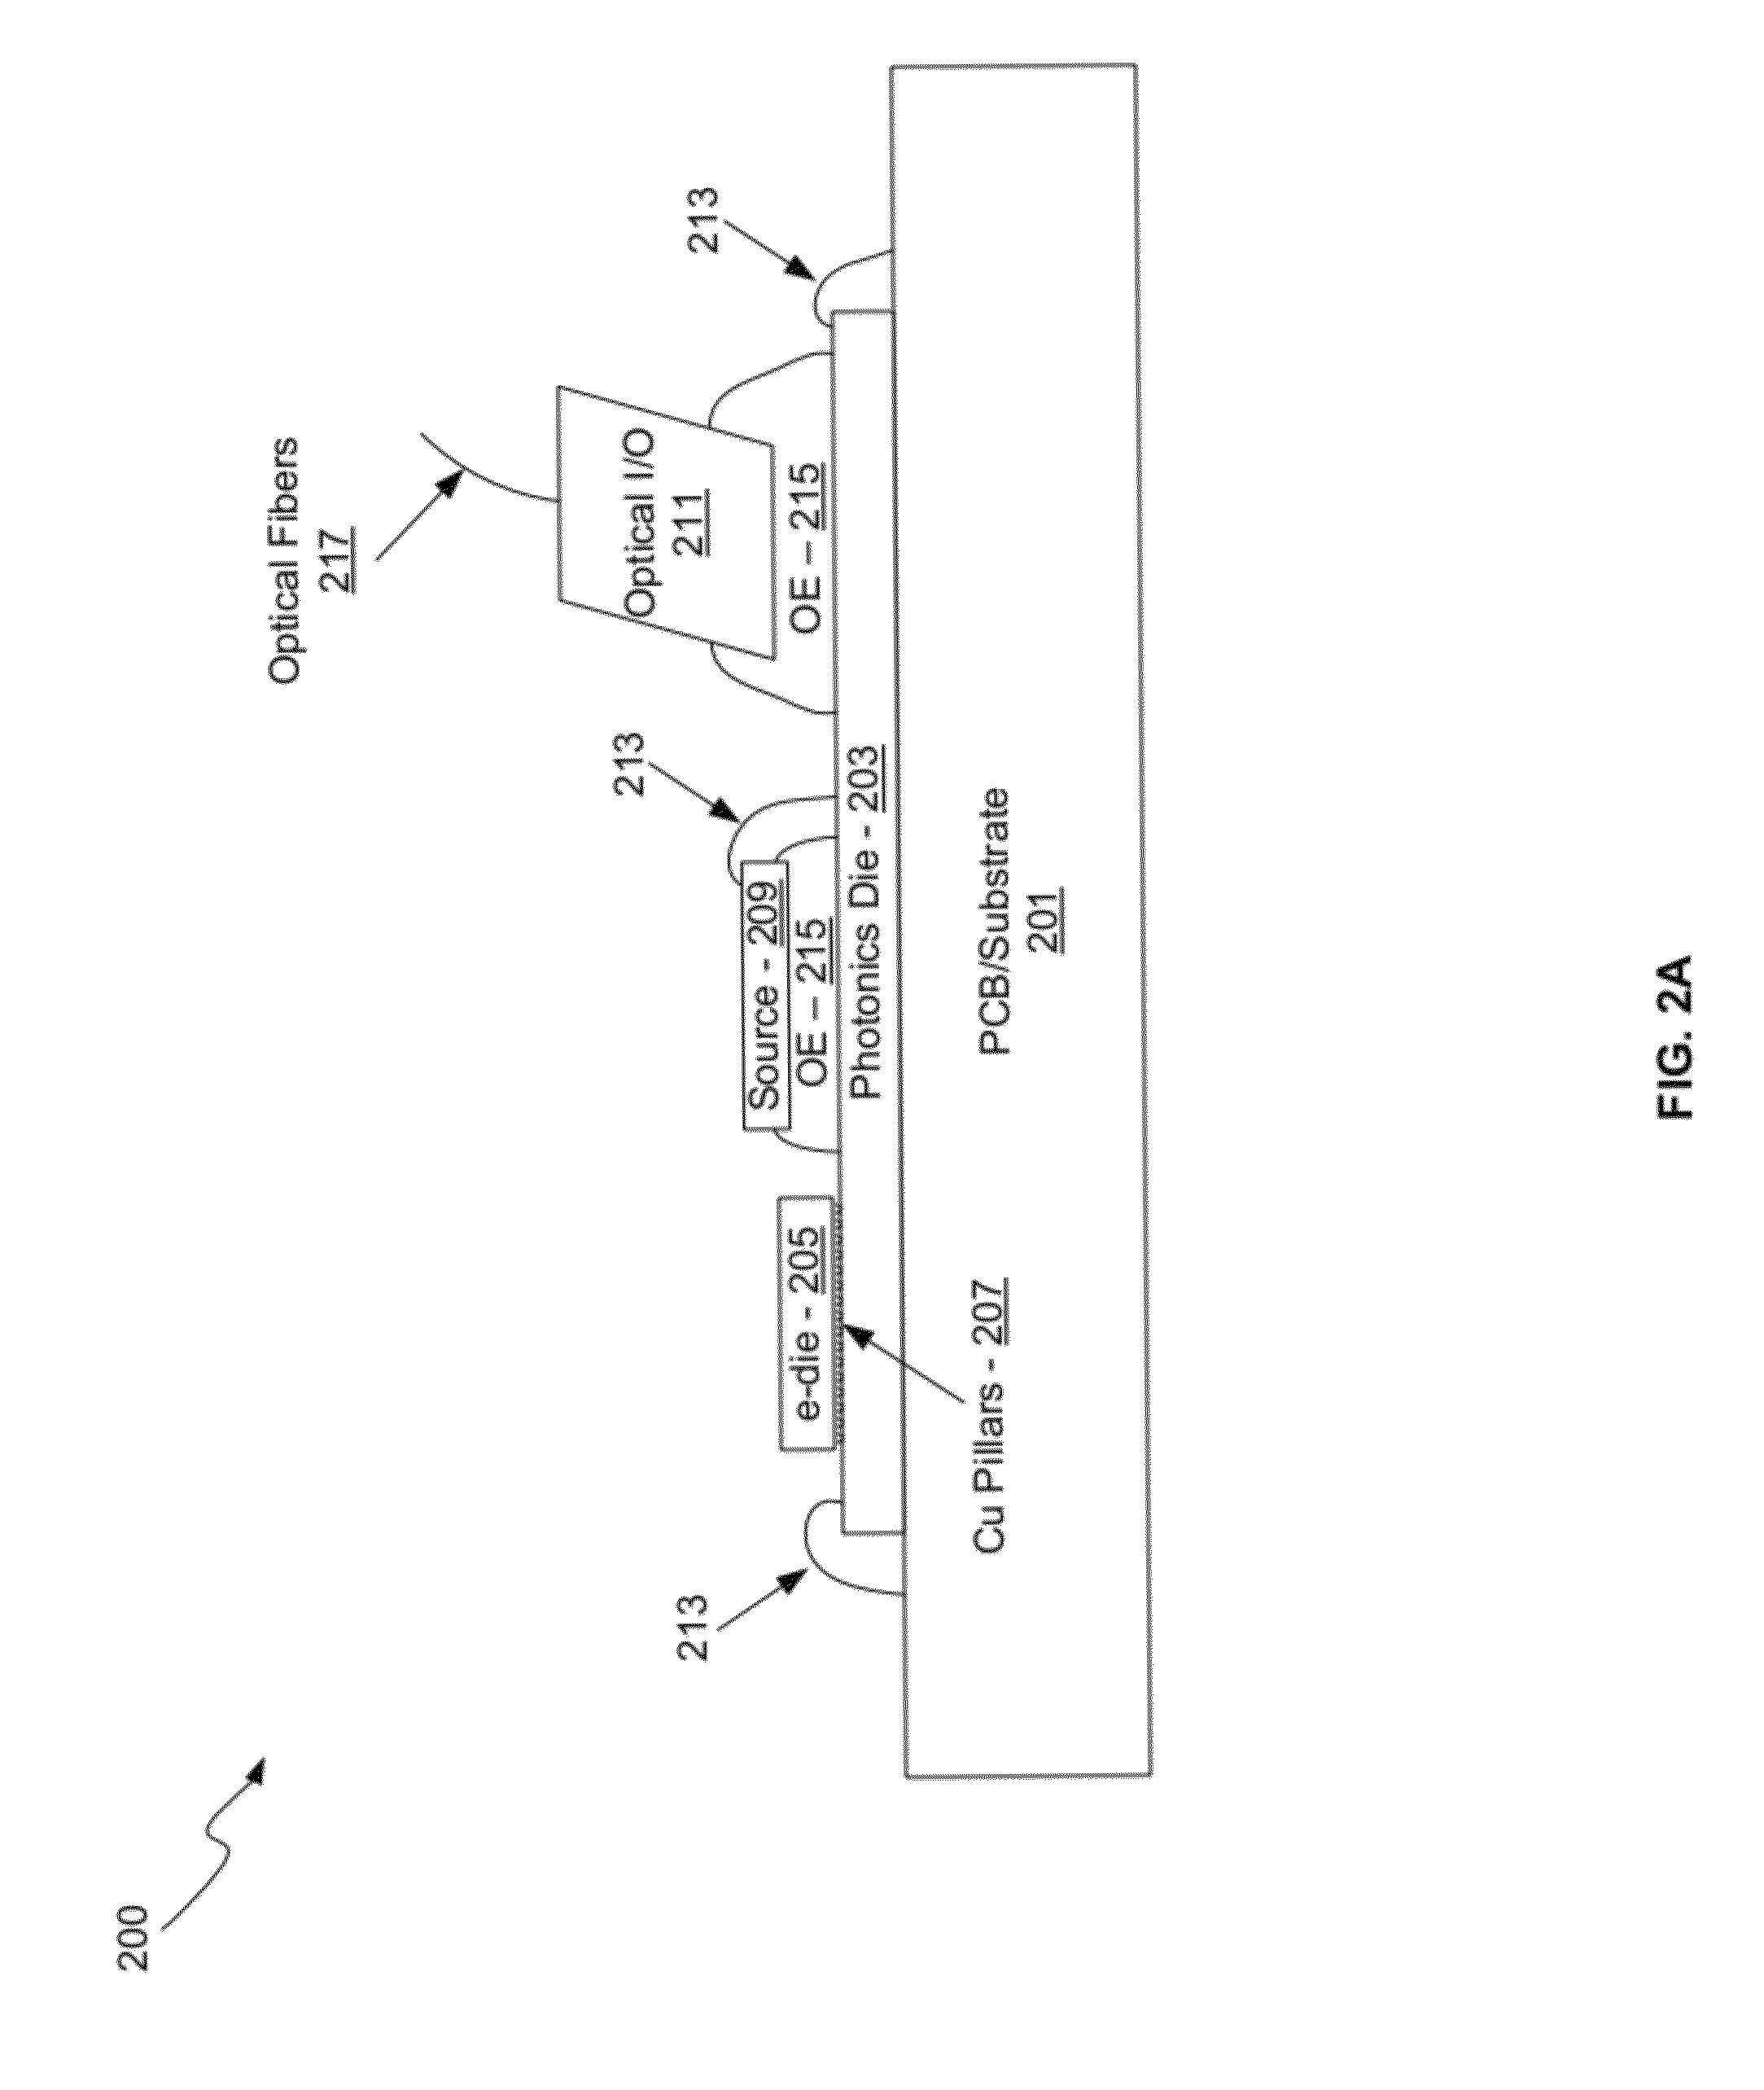 Method and system for hybrid integration of optical communication systems